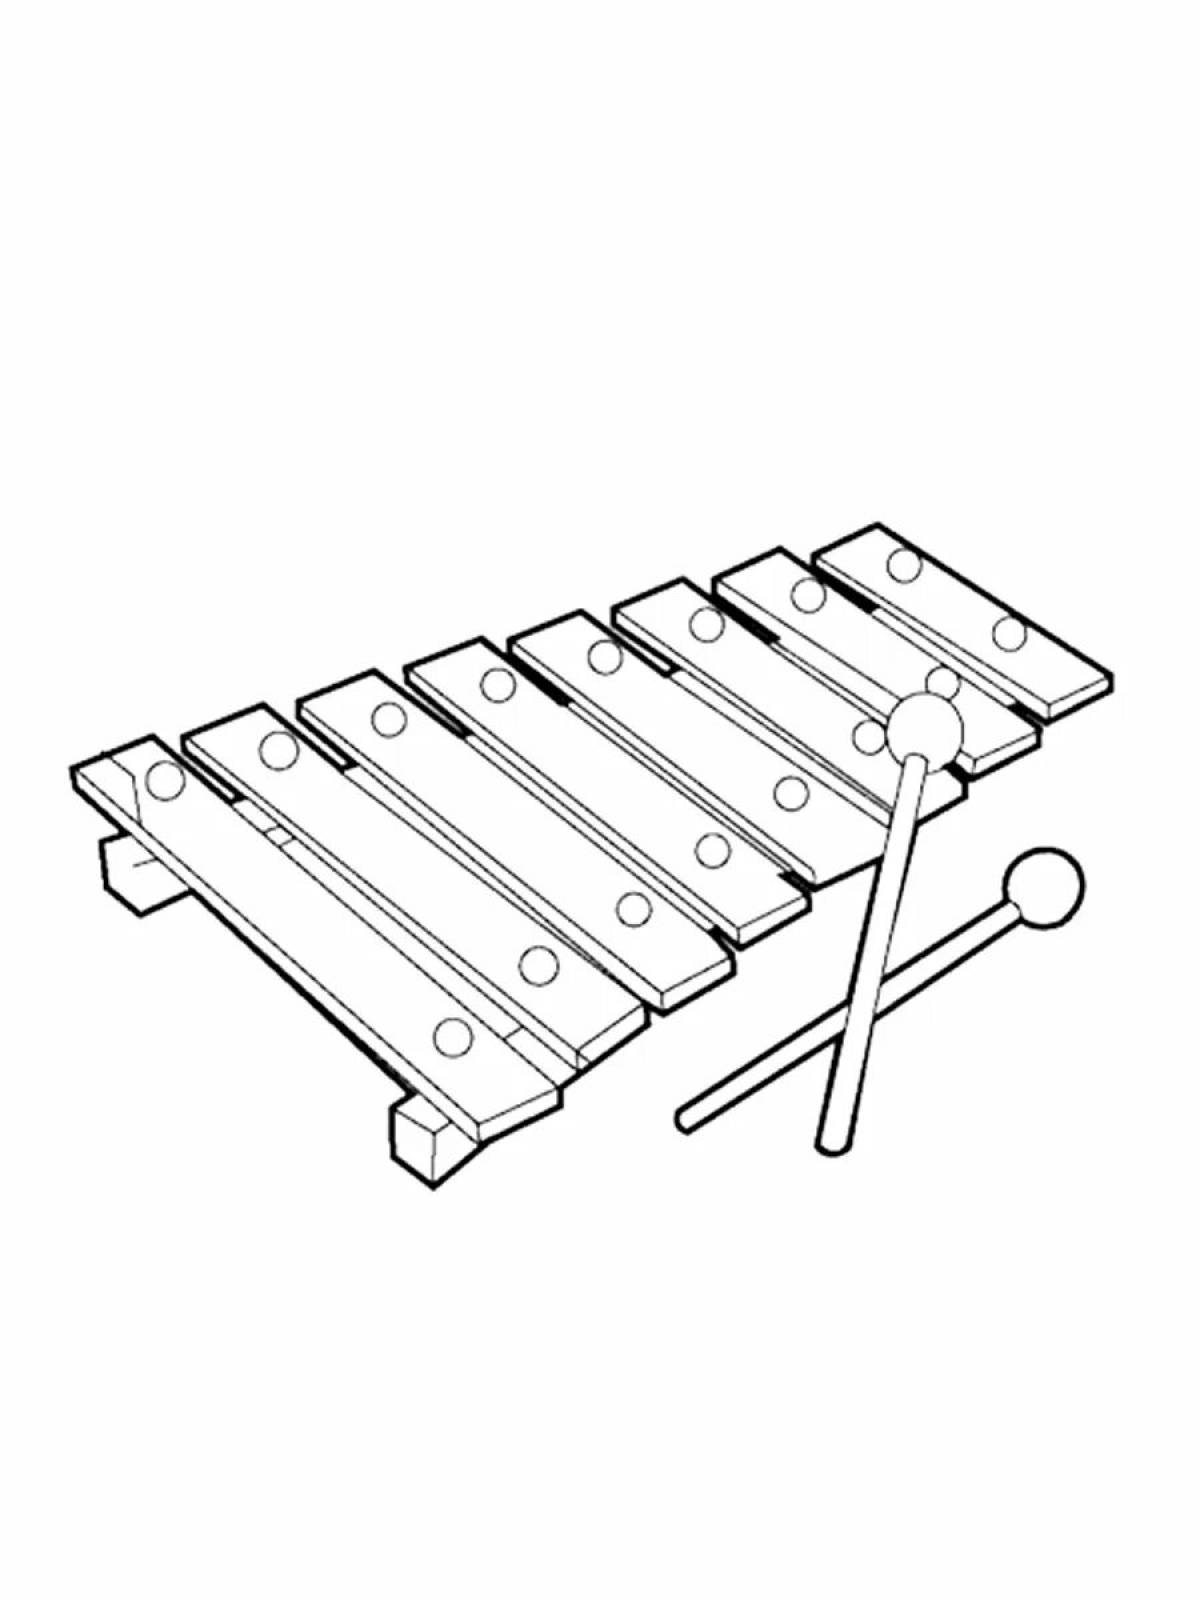 Amazing xylophone coloring pages for kids